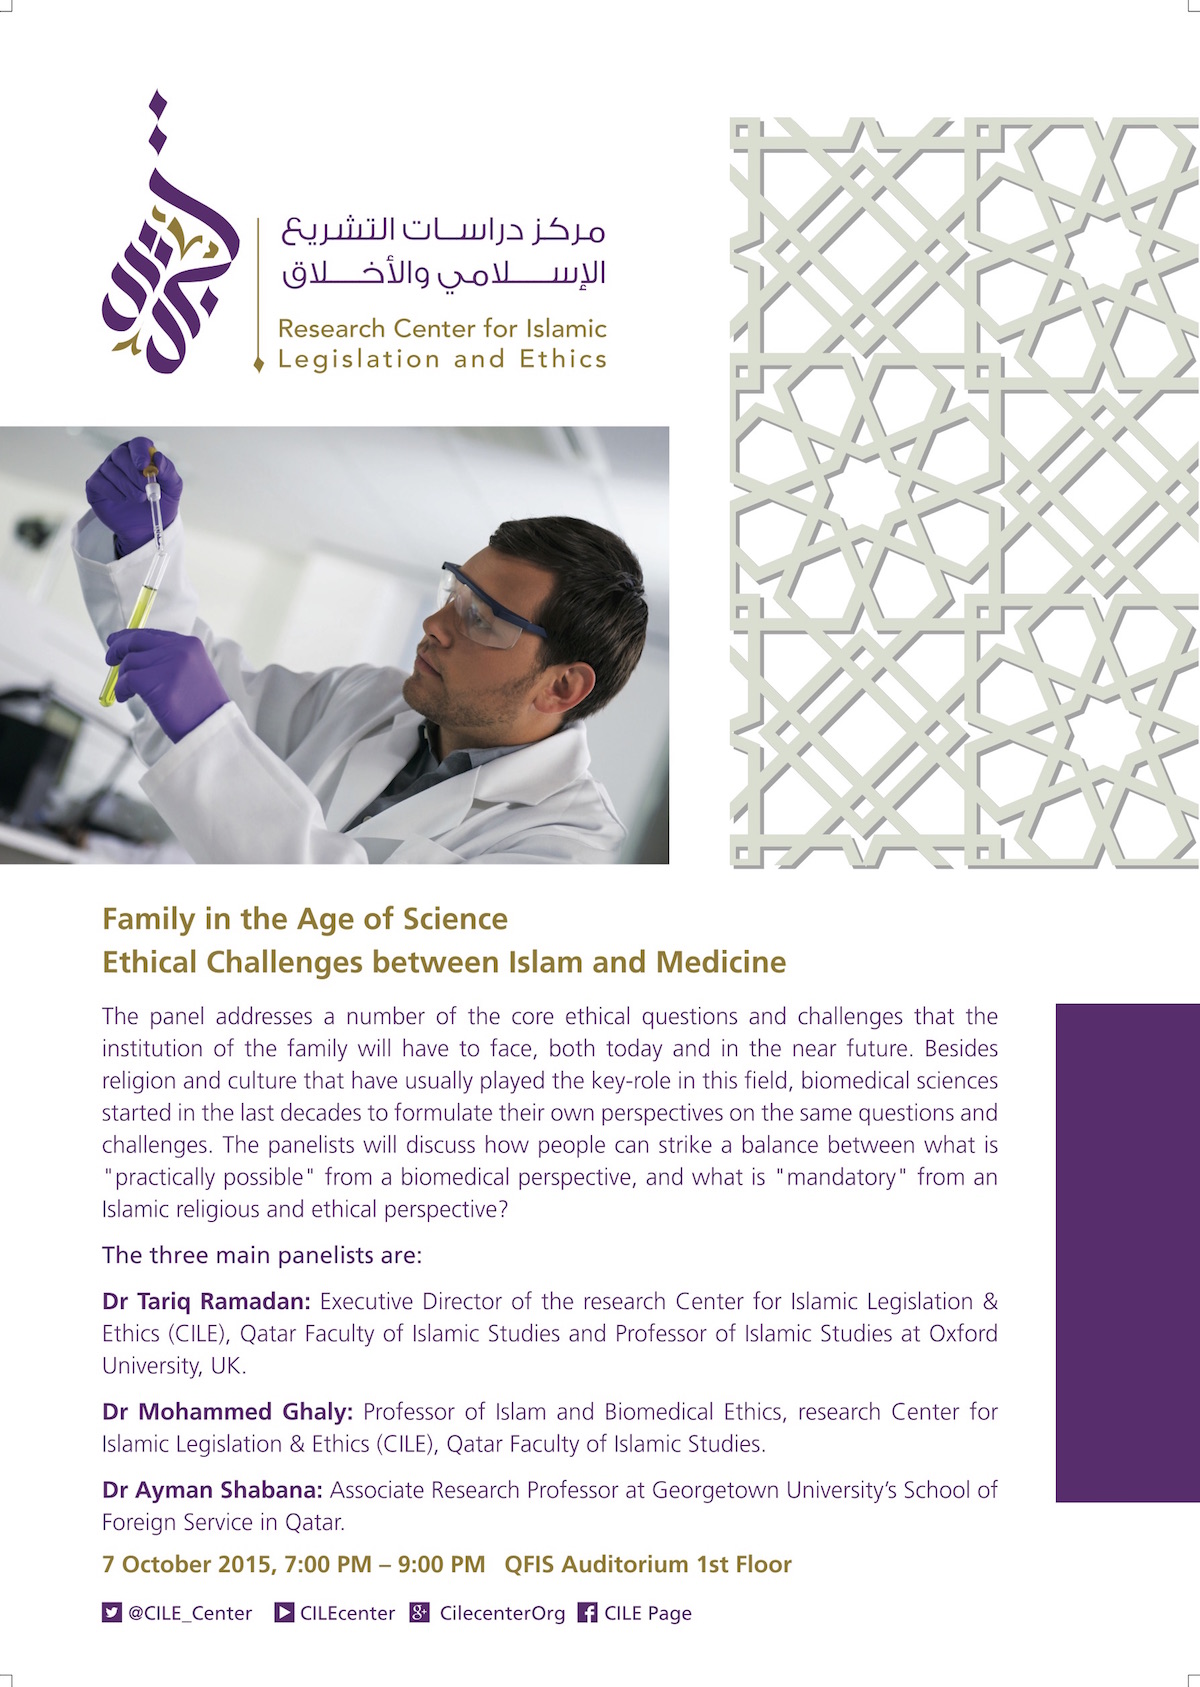 10/2015 Family in the Age of Science: Ethical Challenges between Islam and Medicine